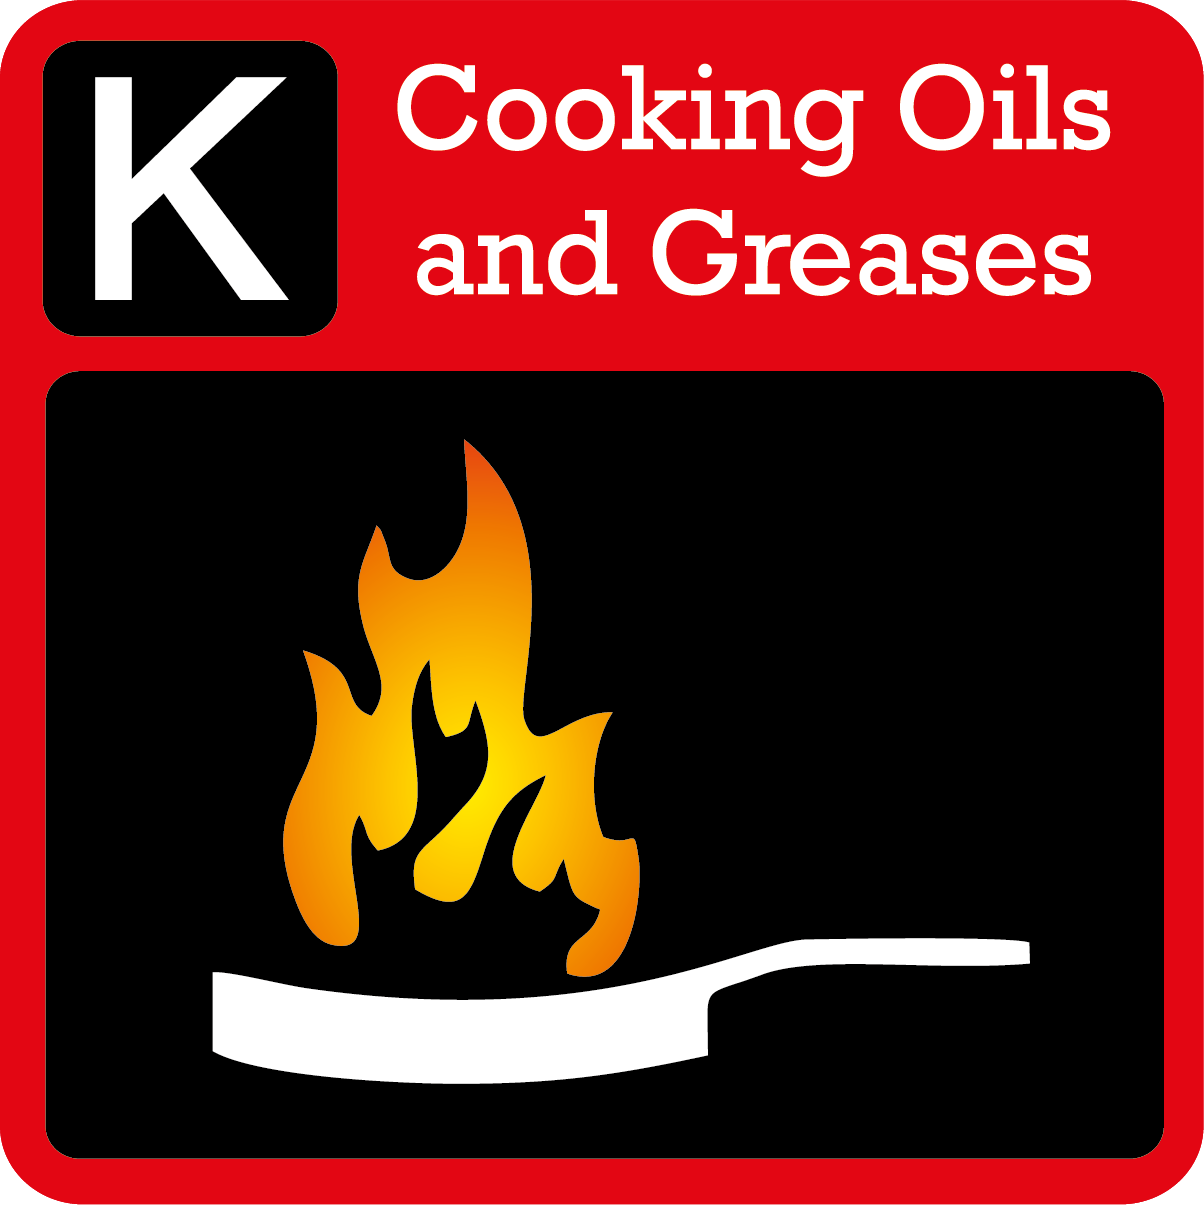 K Cooking Oils and Greases